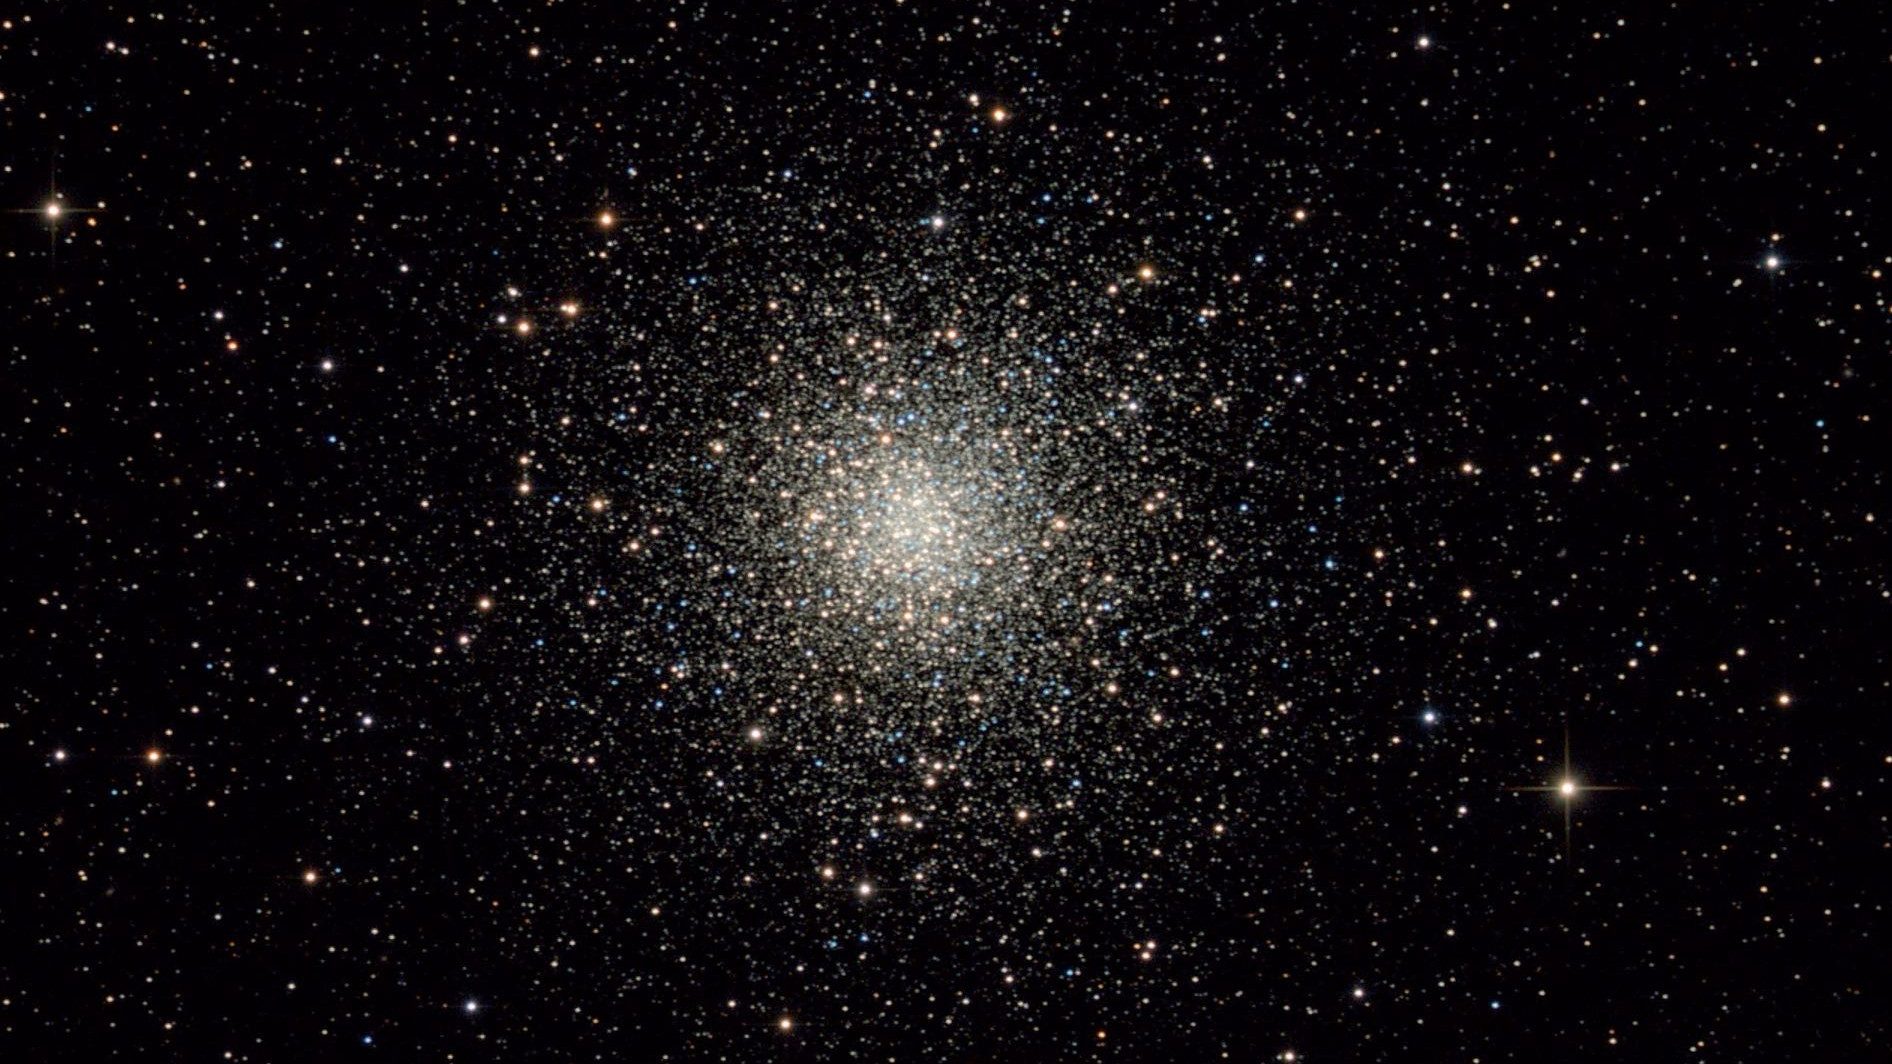 Globular cluster M10 in the constellation of Ophiuchus. Bernhard Hubl/CCD Guide